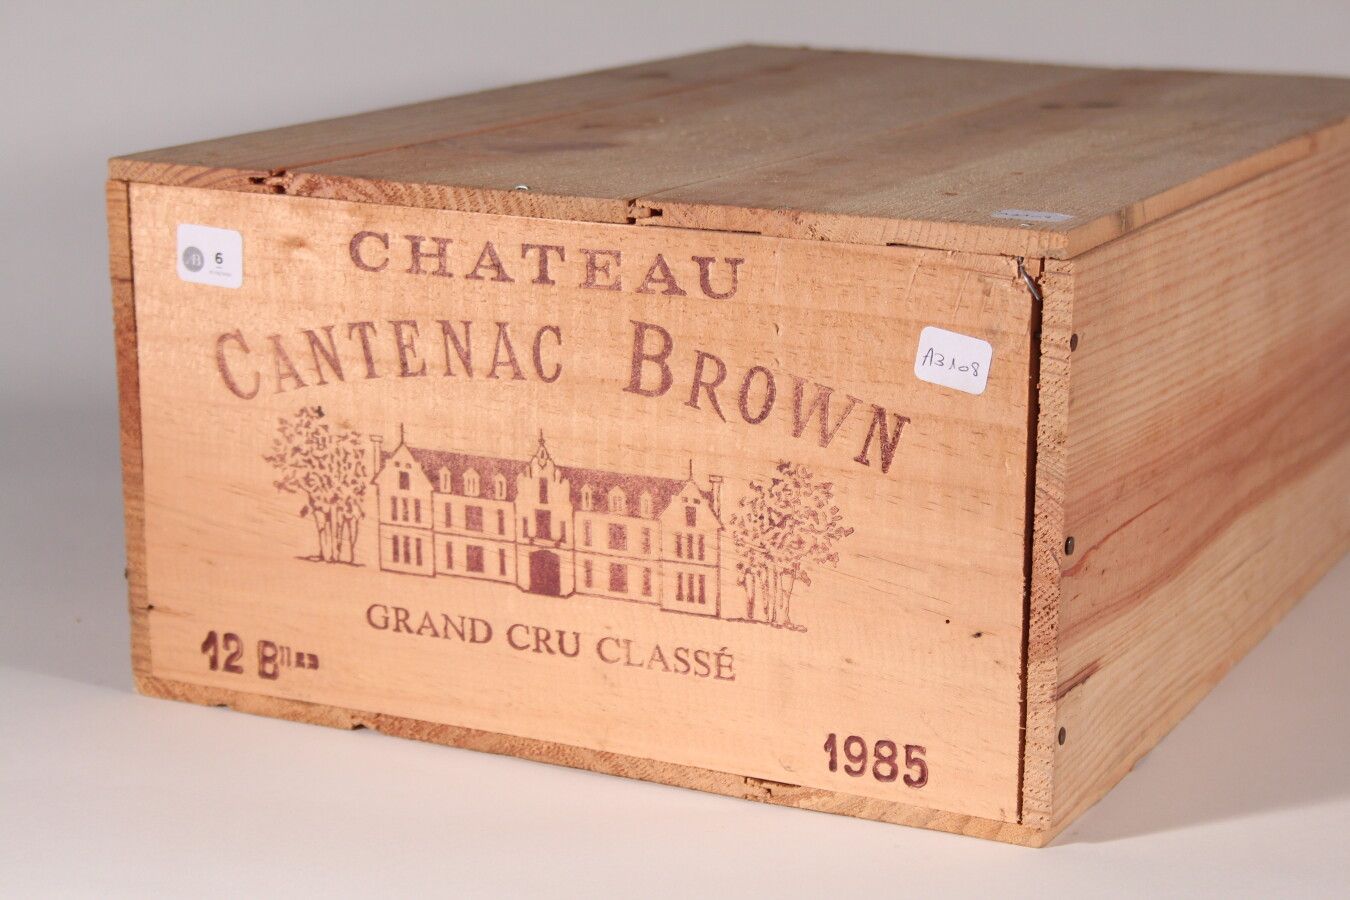 Null 1985 - Château Cantenac Brown

Margaux Rojo - 12 blles CBO